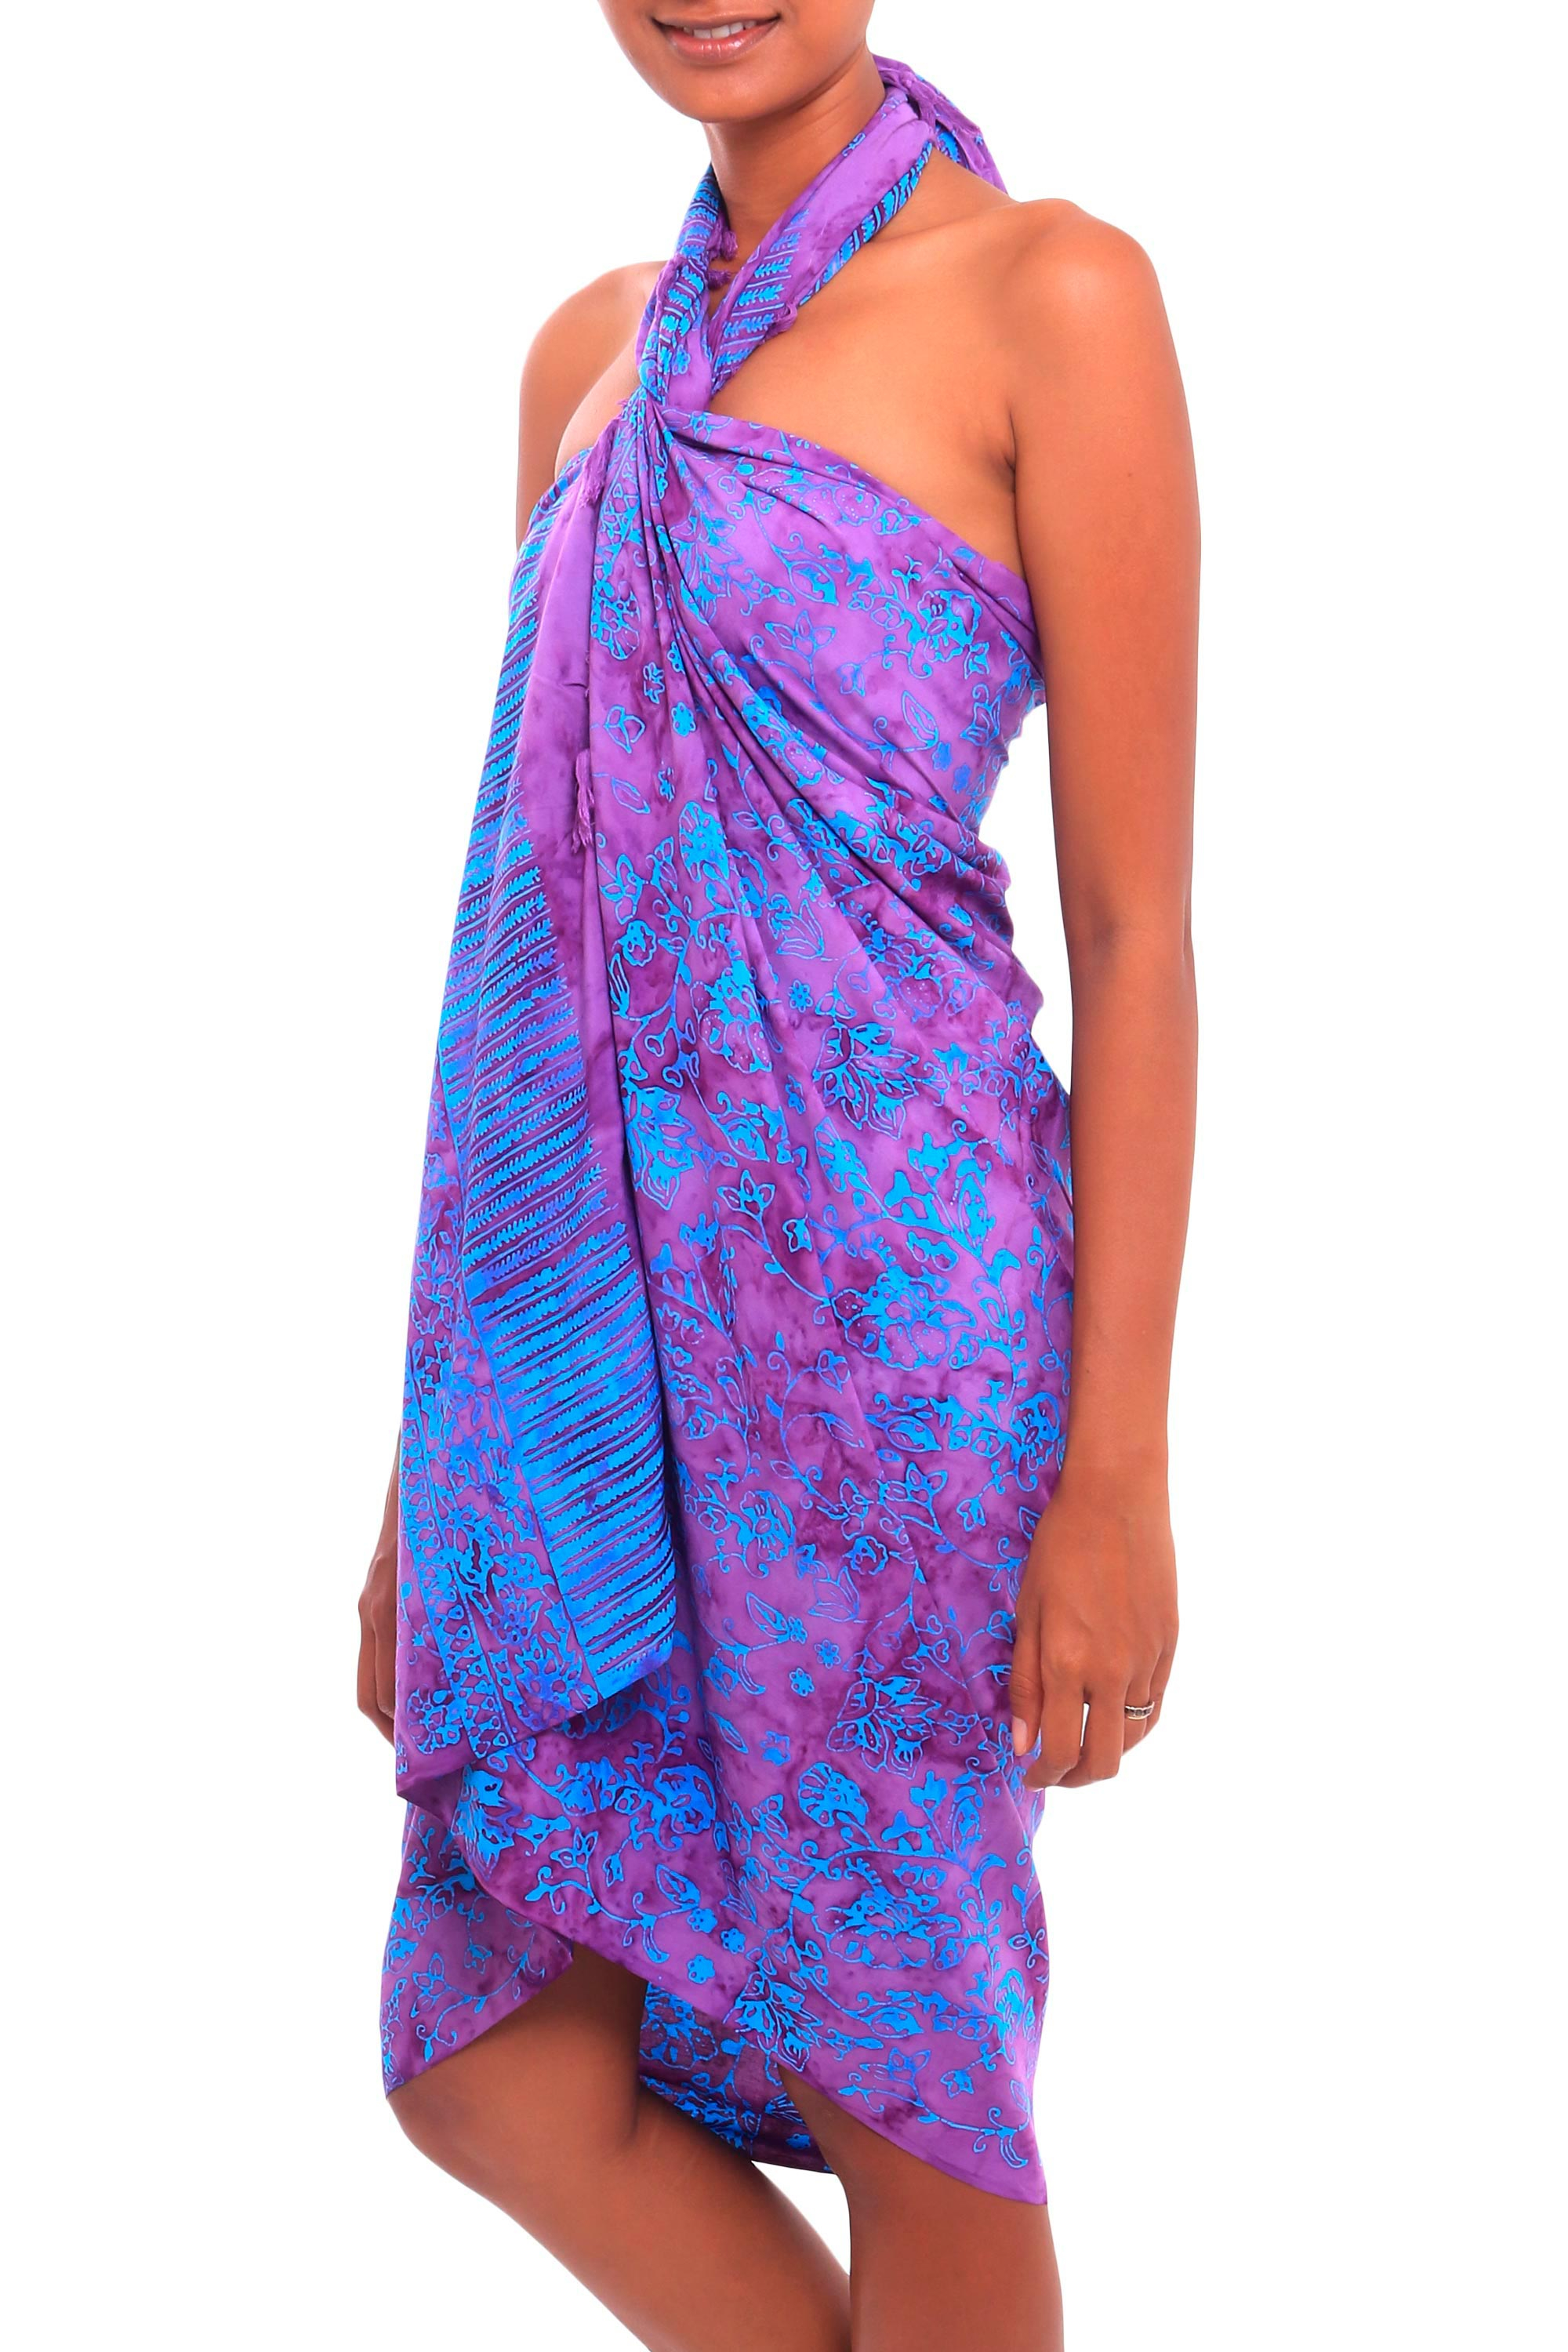 Floral Batik Rayon Sarong in Wisteria from Bali - Mystifying Forest ...